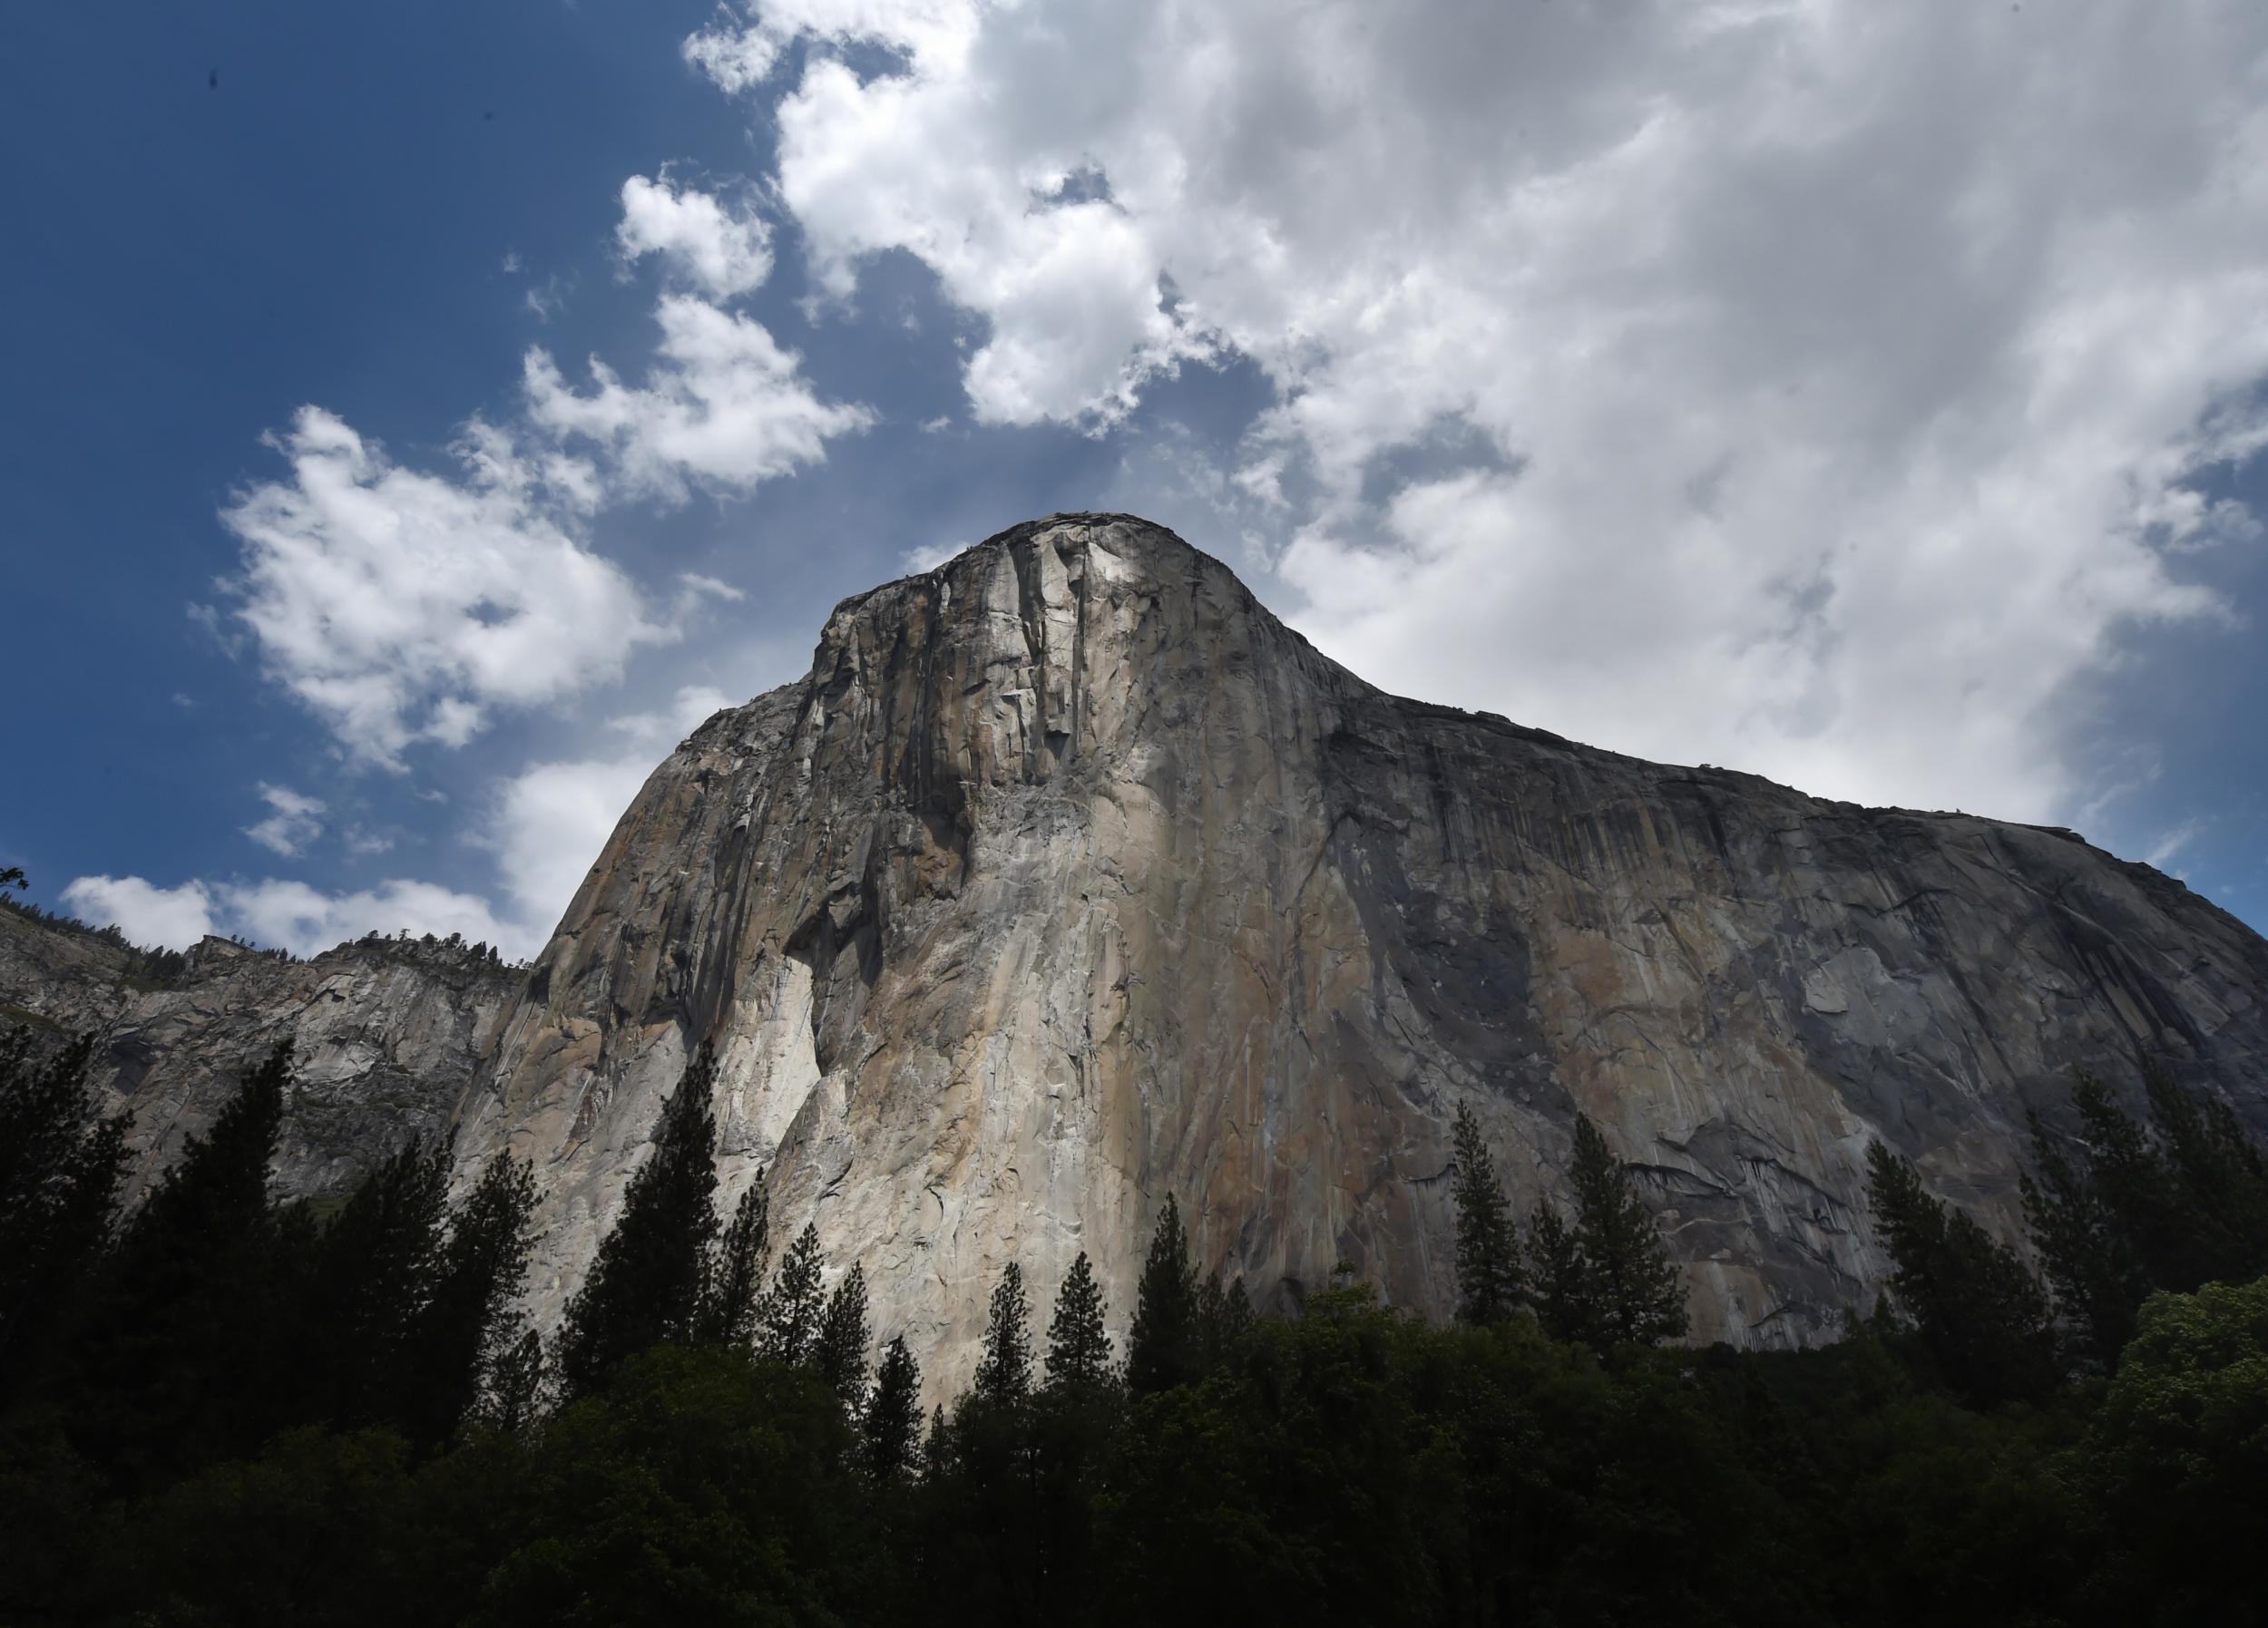 El Capitan climb: 10-year-old girl becomes youngest person to scale Yosemite rock